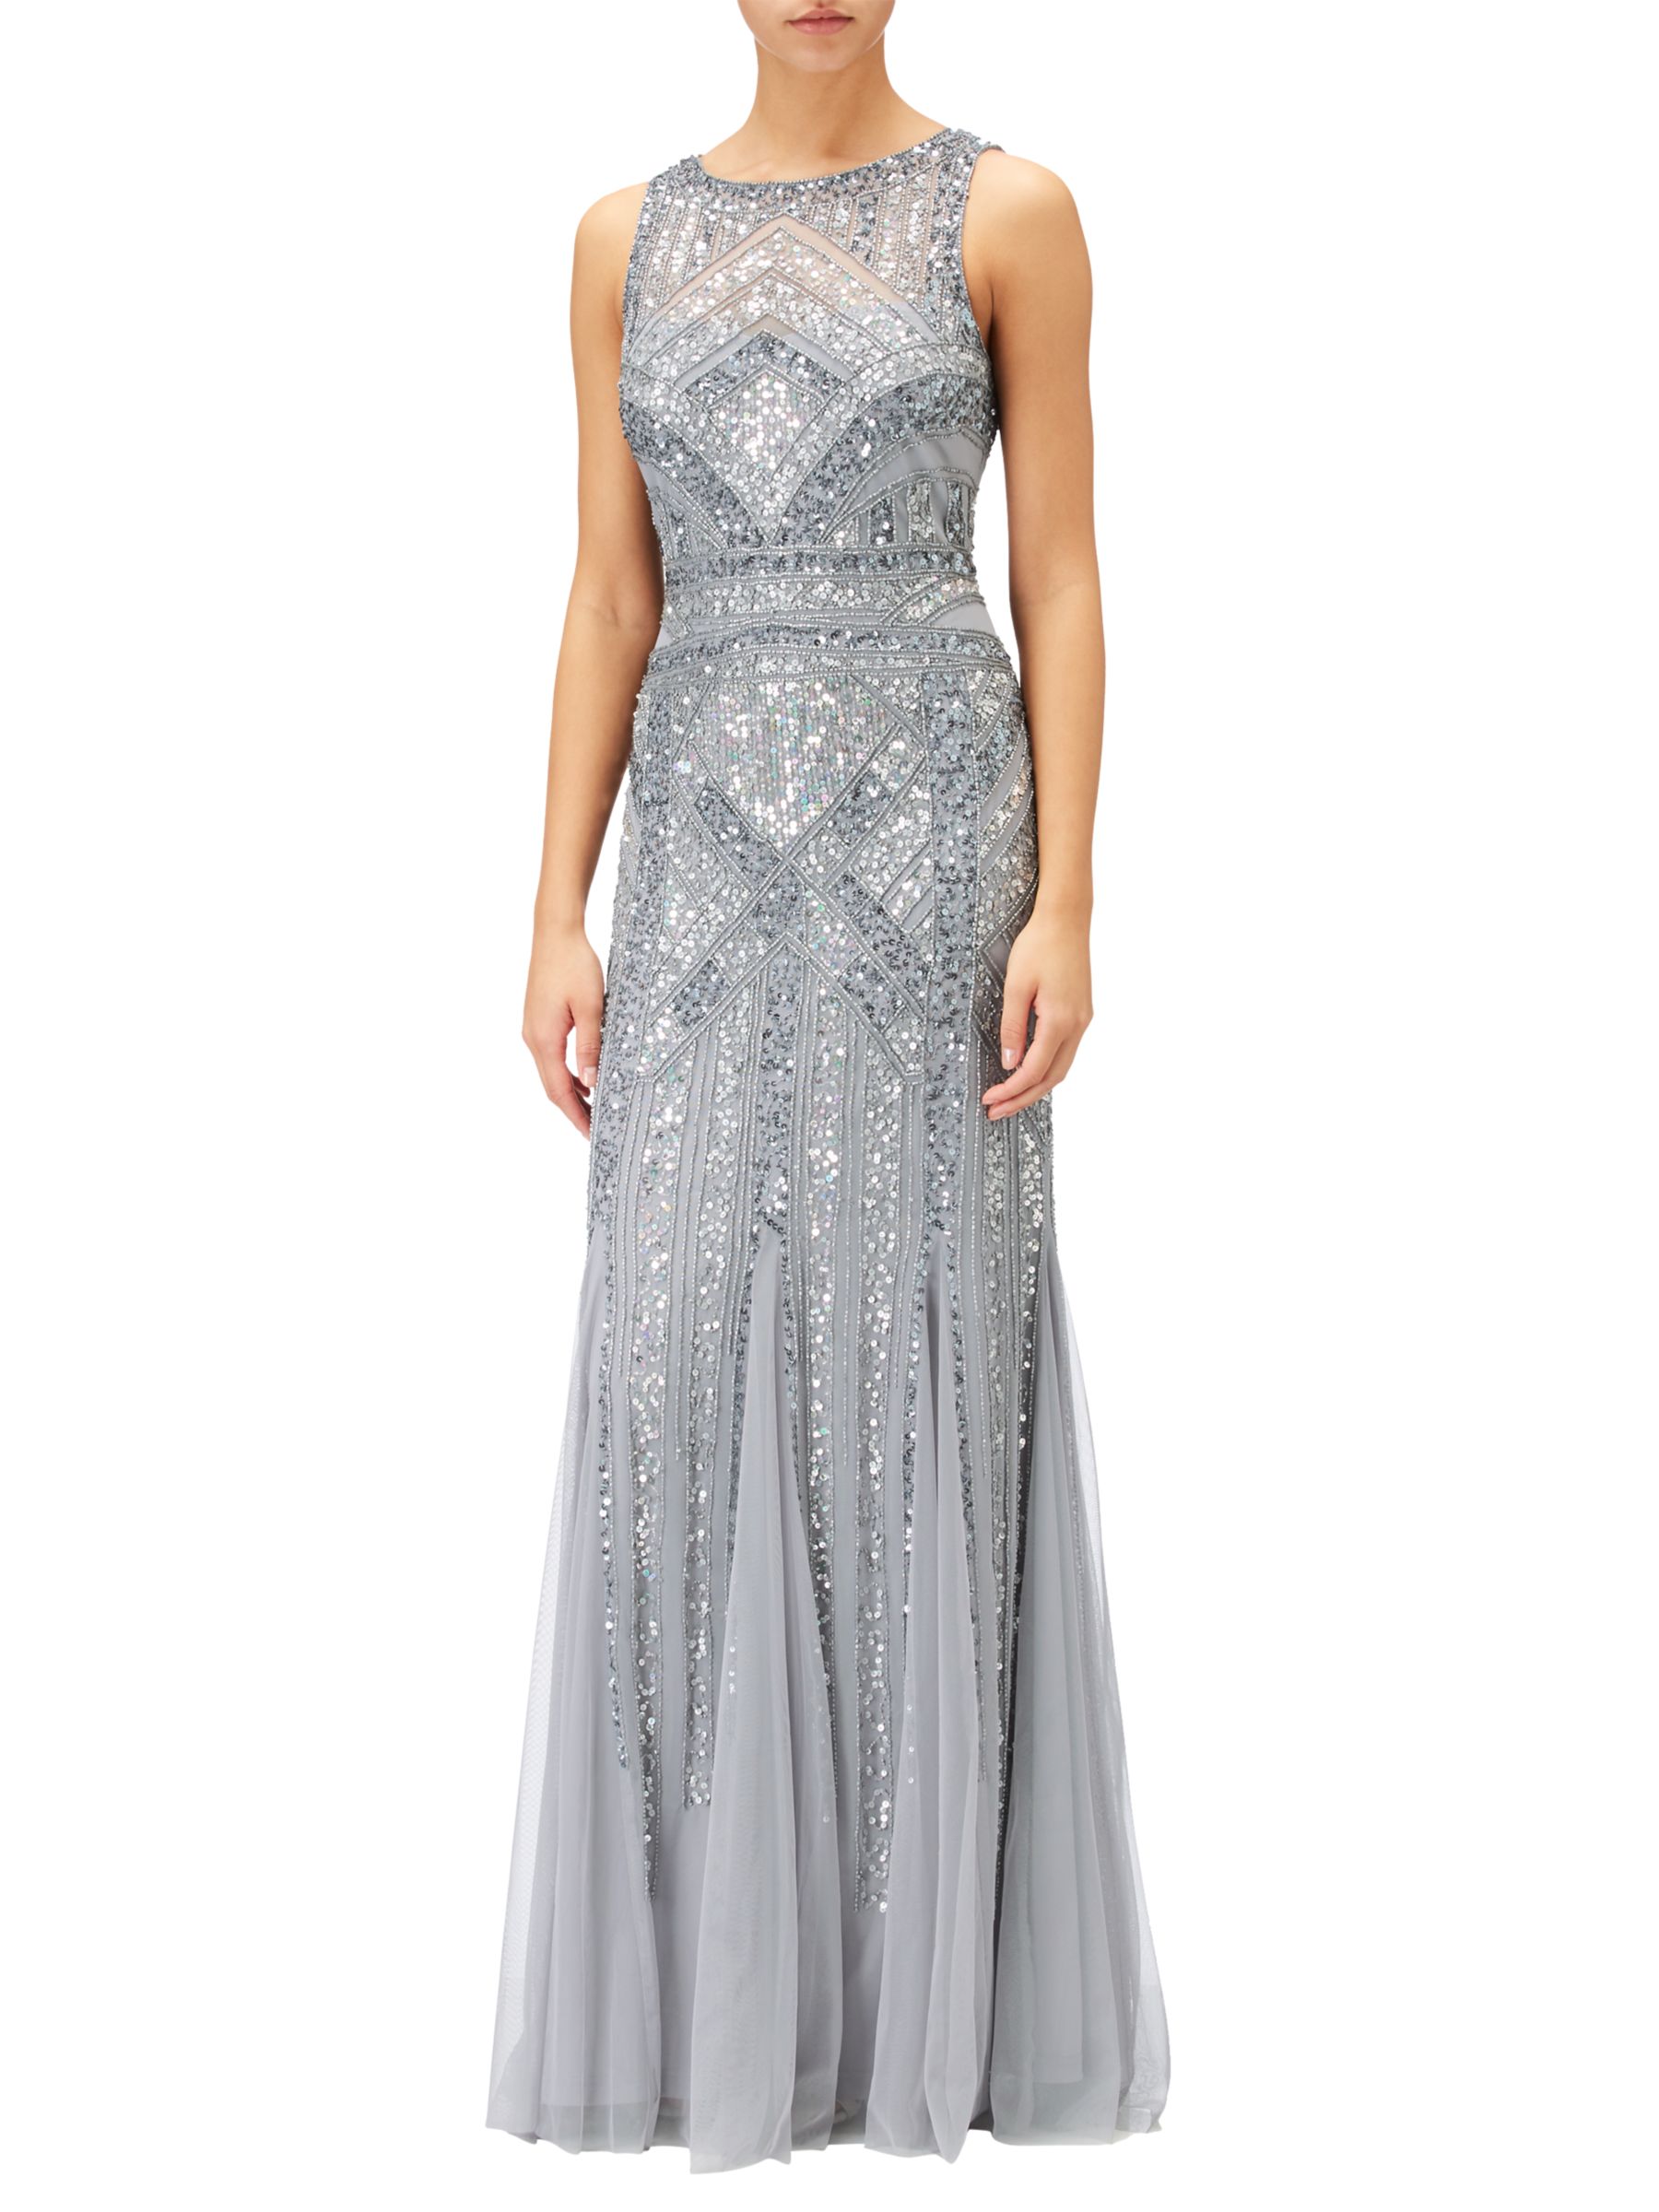 Adrianna Papell Sleeveless Round Neck Beaded Gown, Silver/Grey